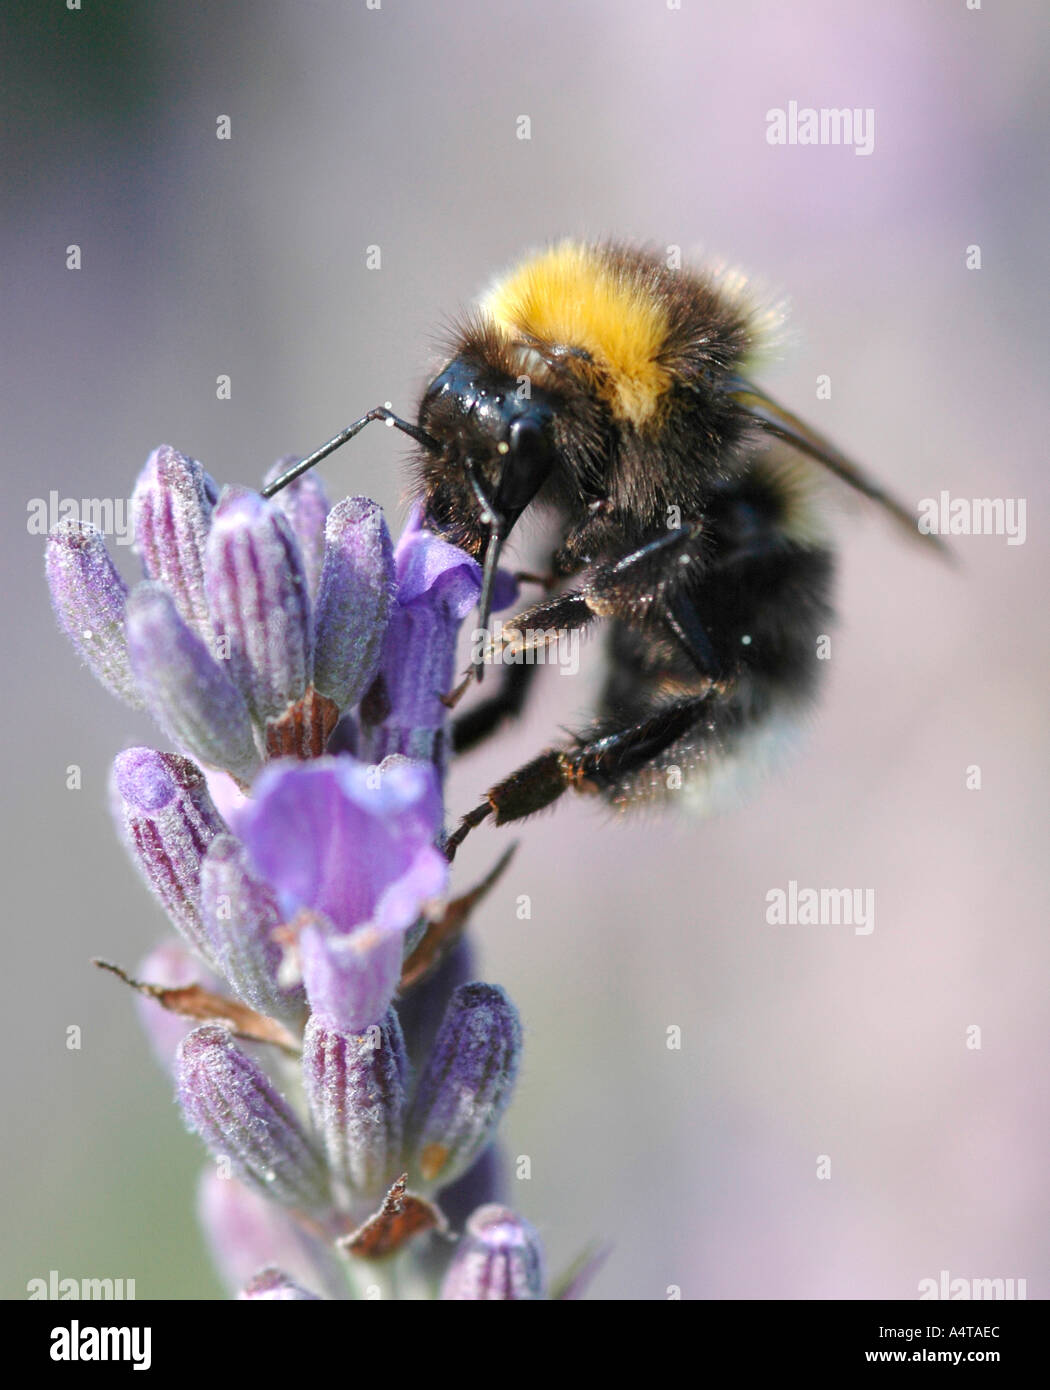 A bumble bee Bombus species feeds on a lavender flower Stock Photo